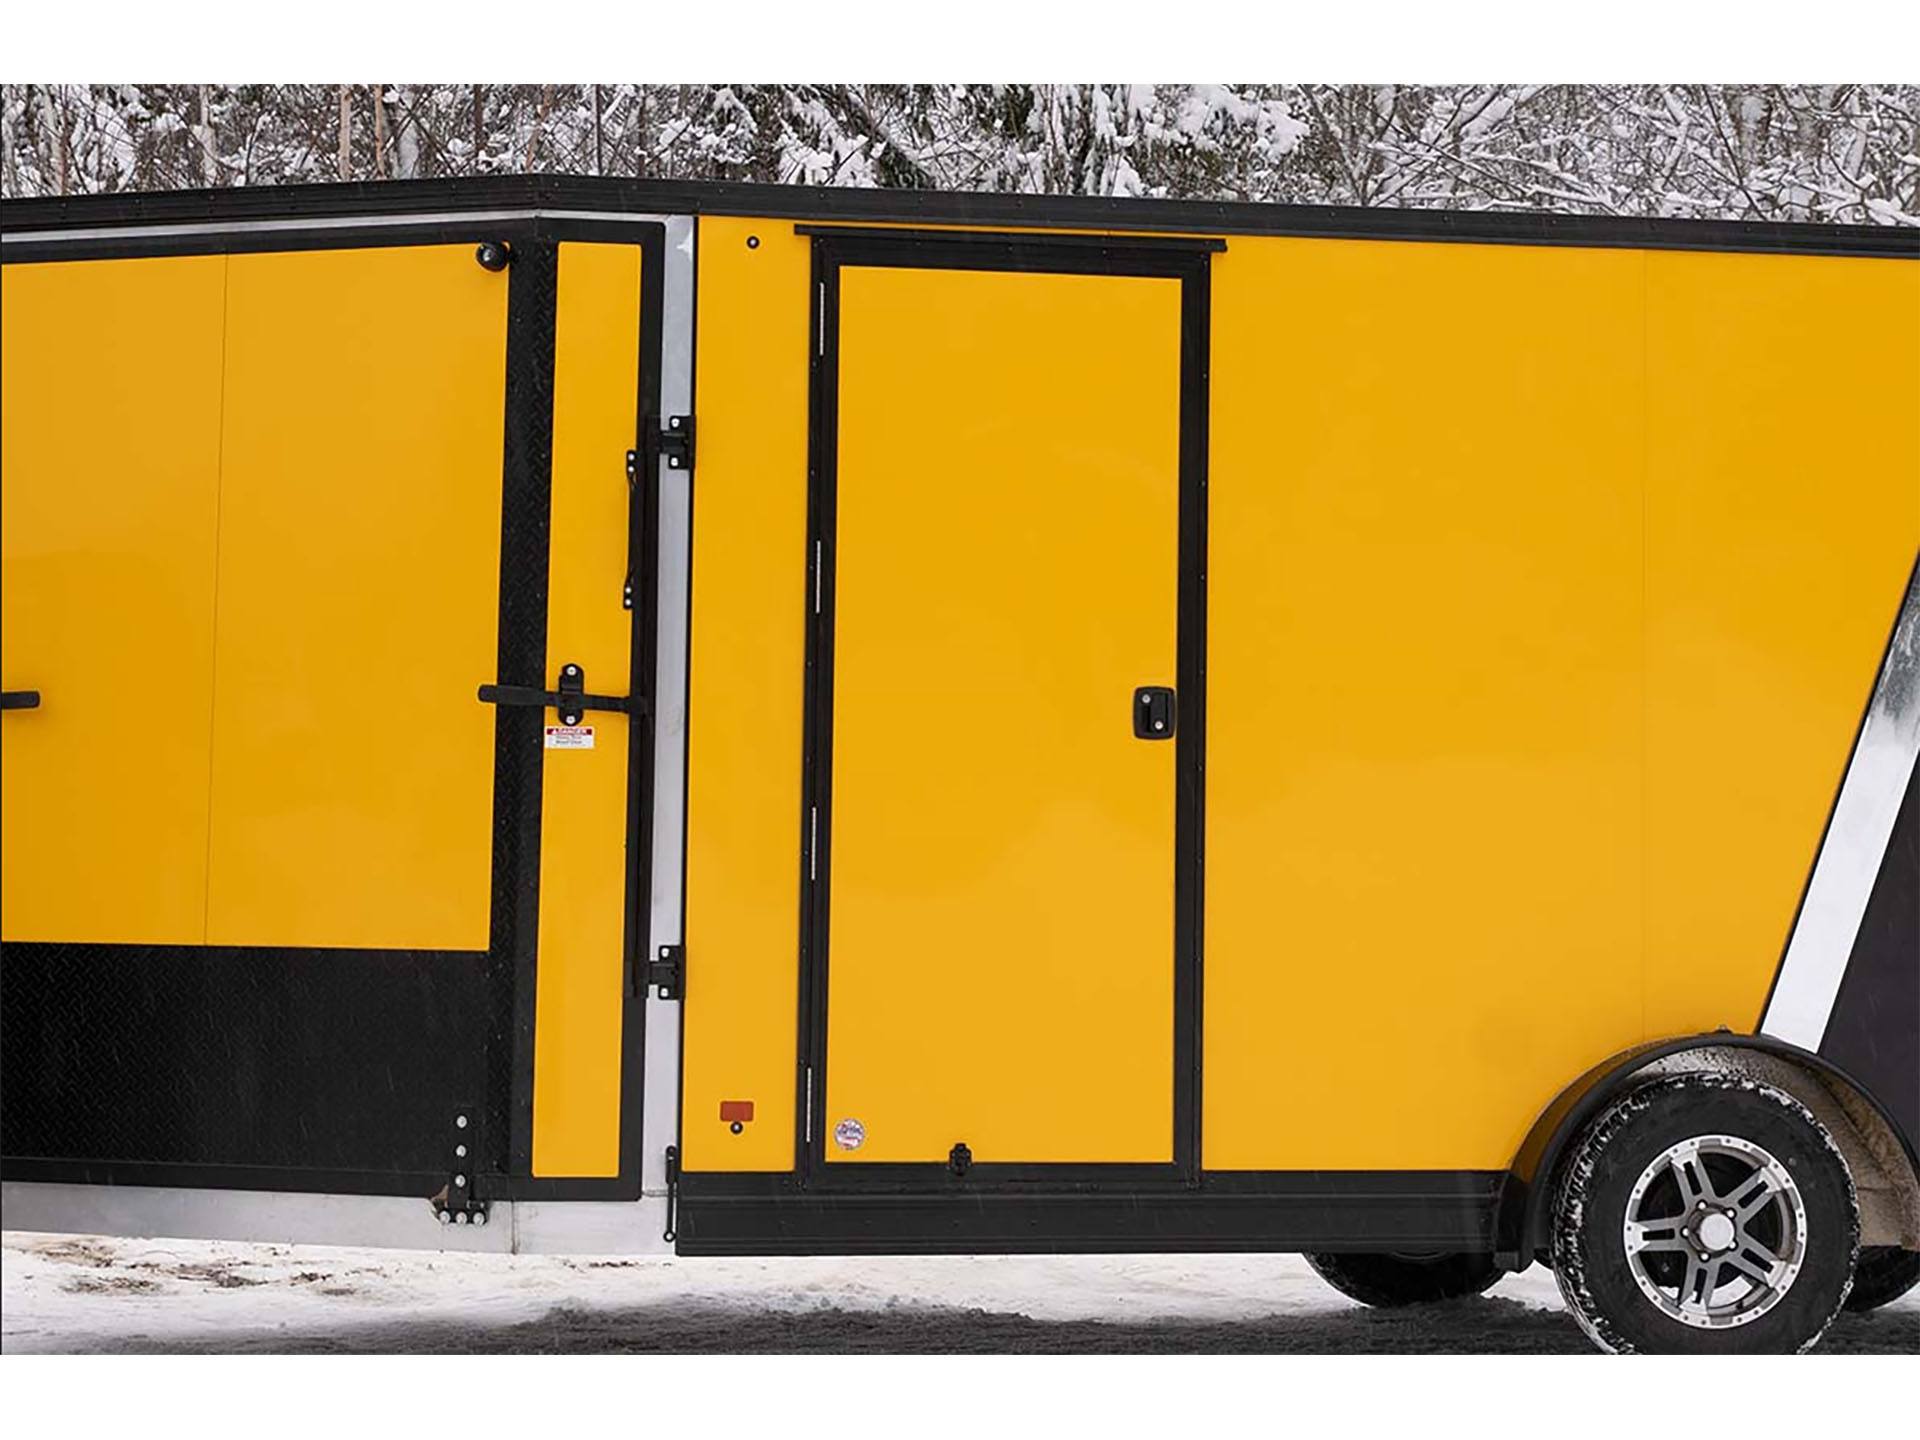 2024 Polaris Trailers Enclosed Cargo Trailers 5 ft. Wide - 8 ft. Long in Lancaster, Texas - Photo 6